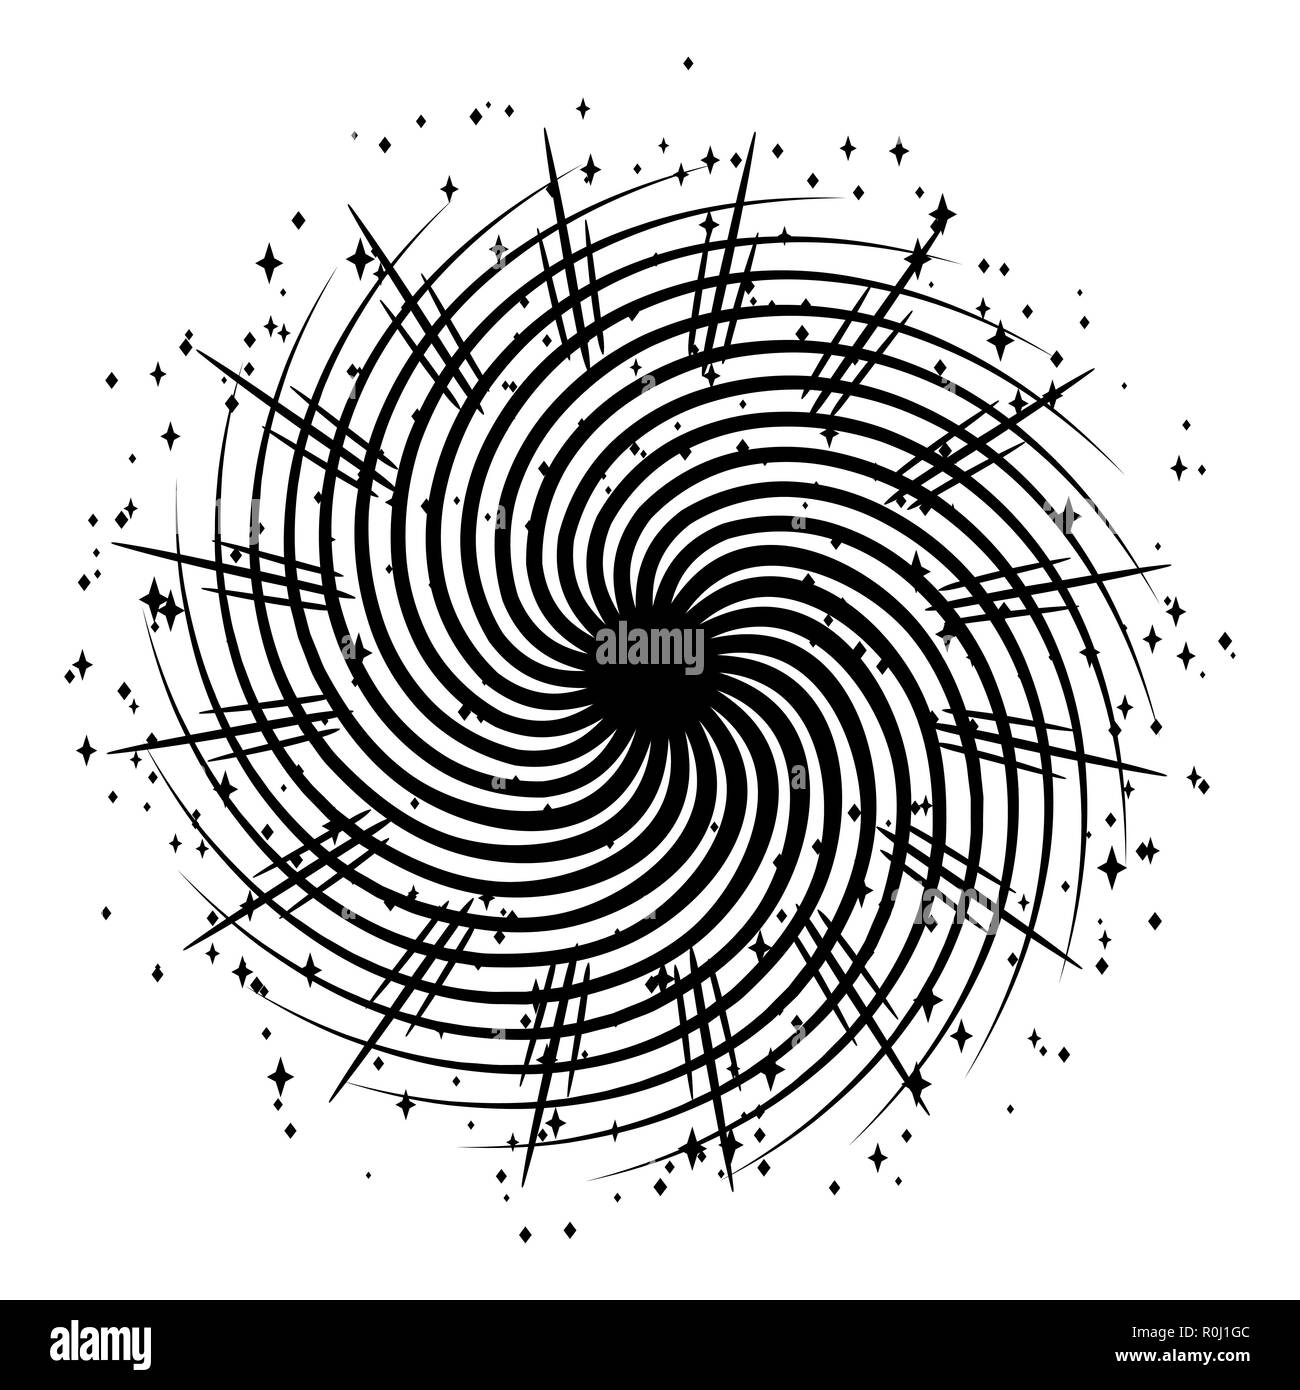 Hypnotizing spiral with rays and stars. Stock Vector